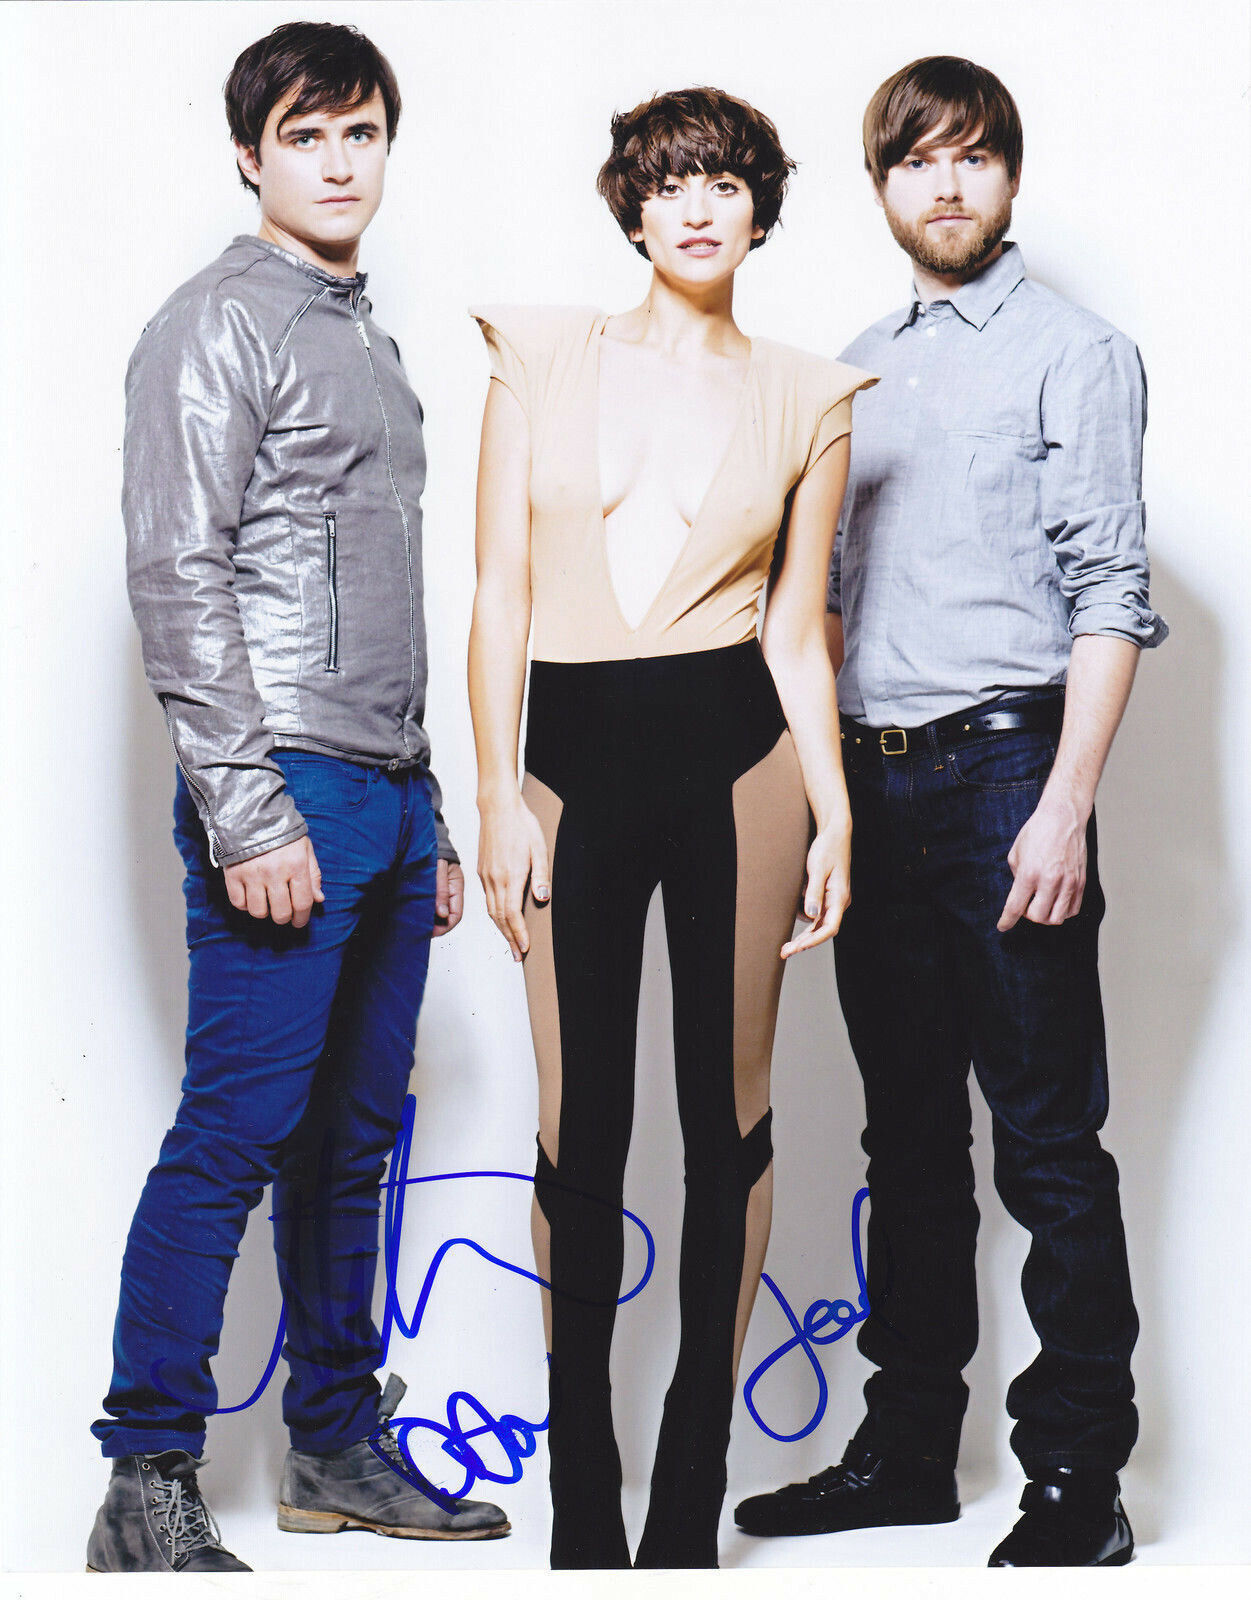 Dragonette SIGNED AUTOGRAPHED 8X10 Photo Poster painting MARTINA SORBARA BIG IN JAPAN #3